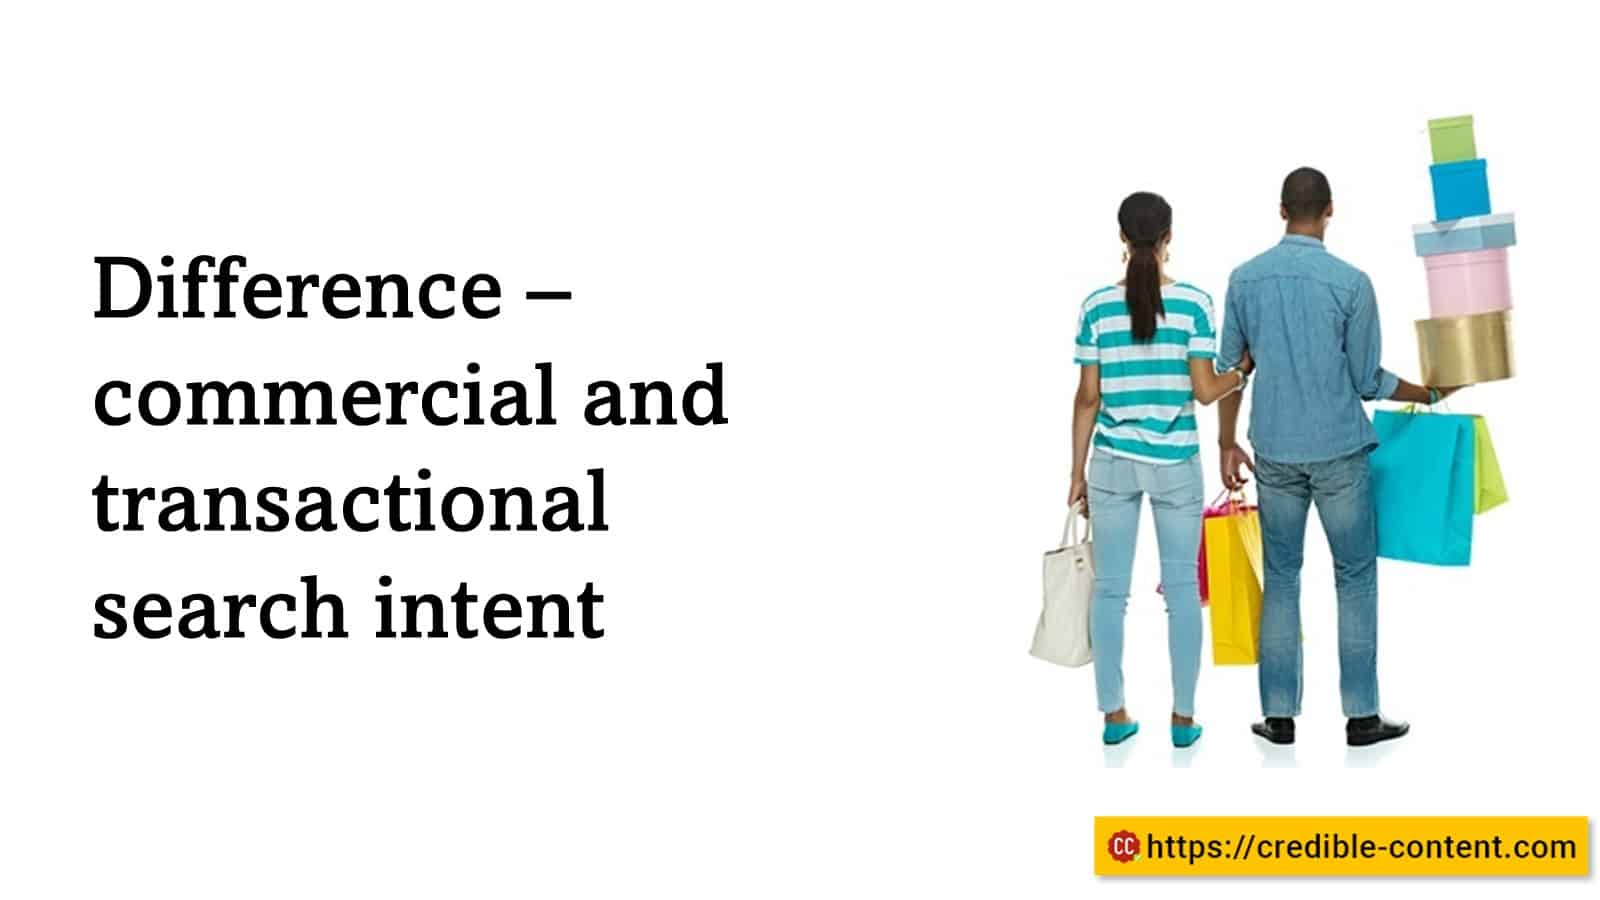 Difference – commercial and transactional search intent